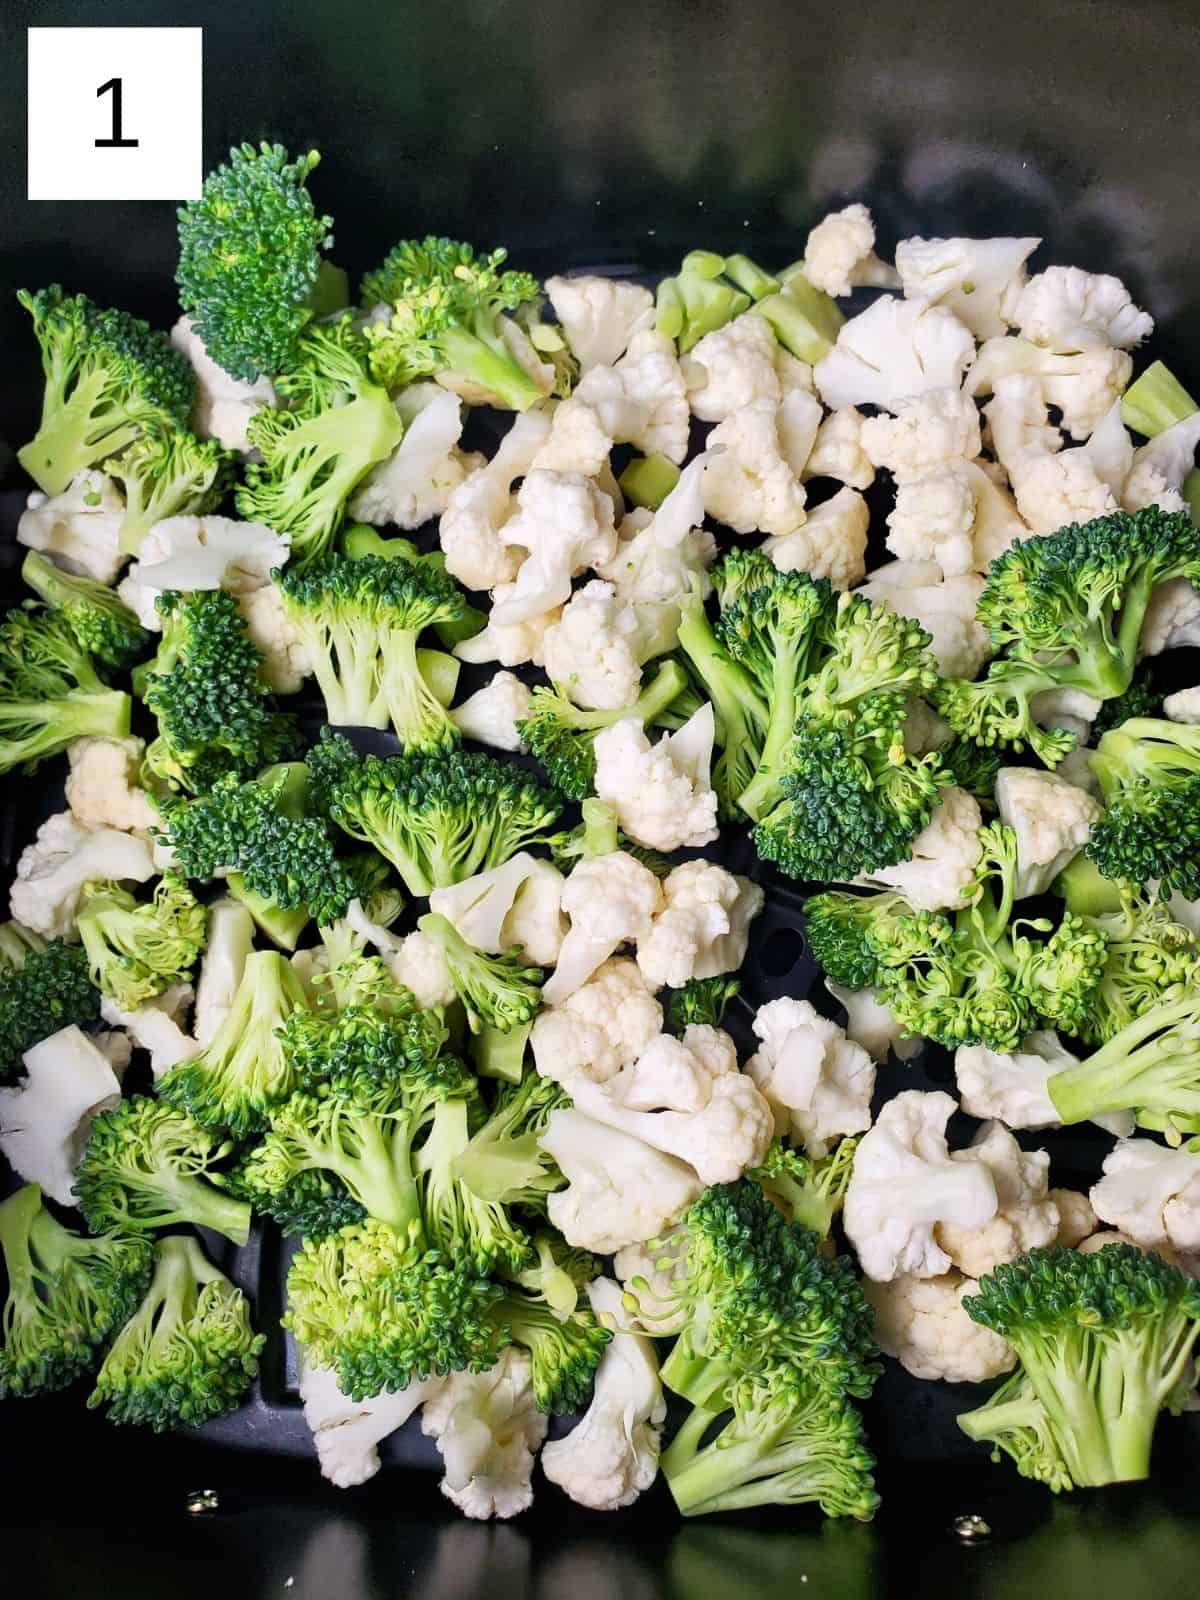 fresh broccoli and cauliflower, chopped into small pieces, in an air fryer.